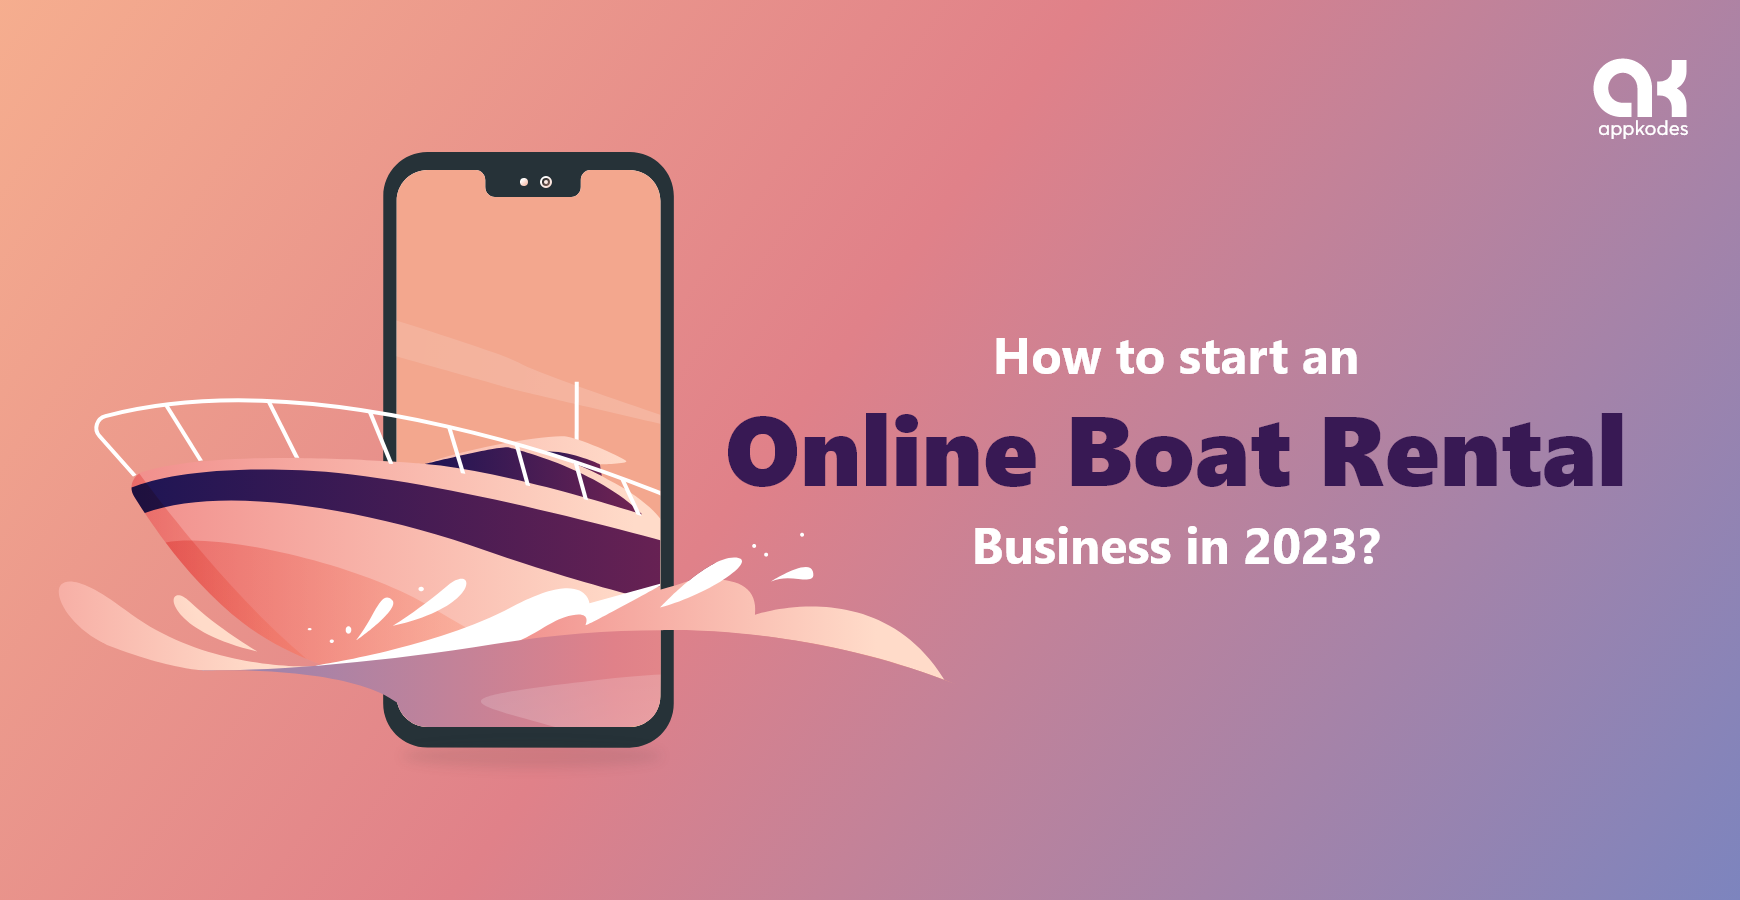 How to start an online boat rental business in 2023